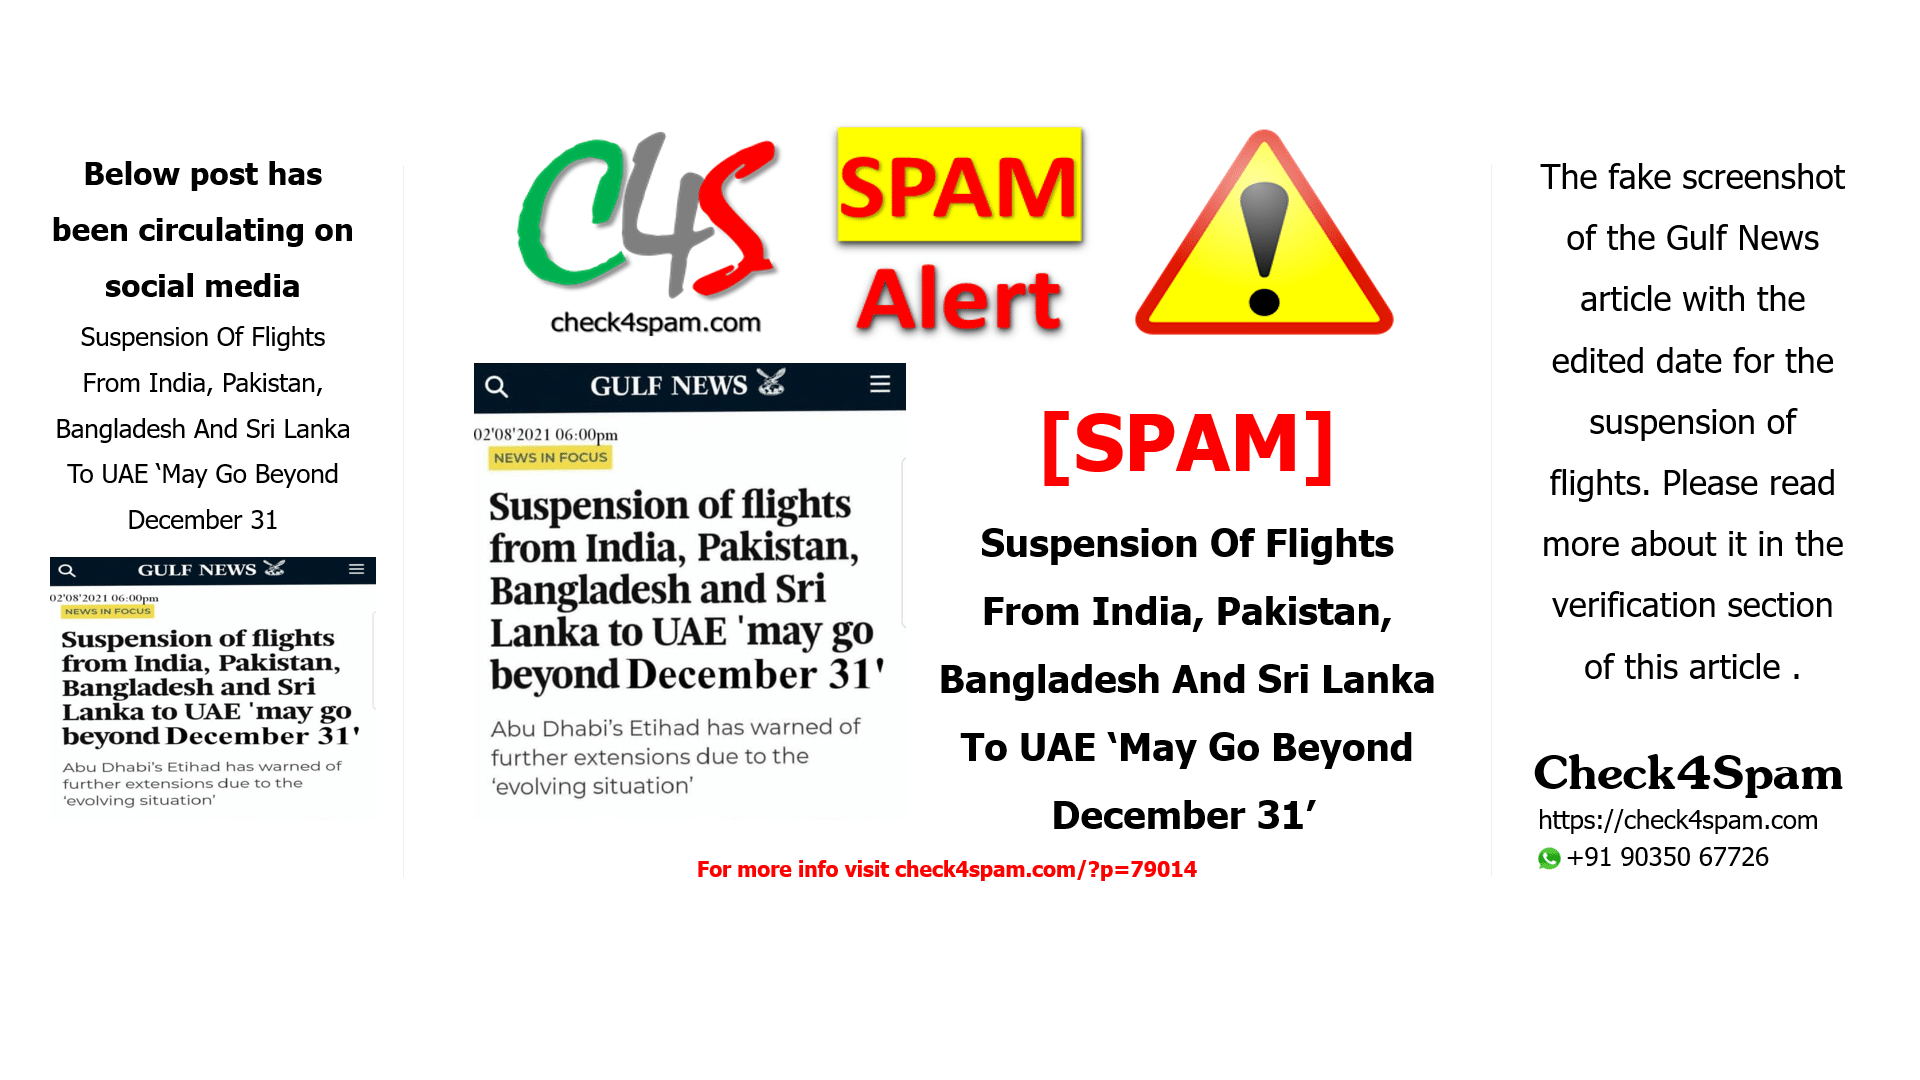 Suspension Of Flights From India, Pakistan, Bangladesh, And Sri Lanka To UAE May Go Beyond December 31